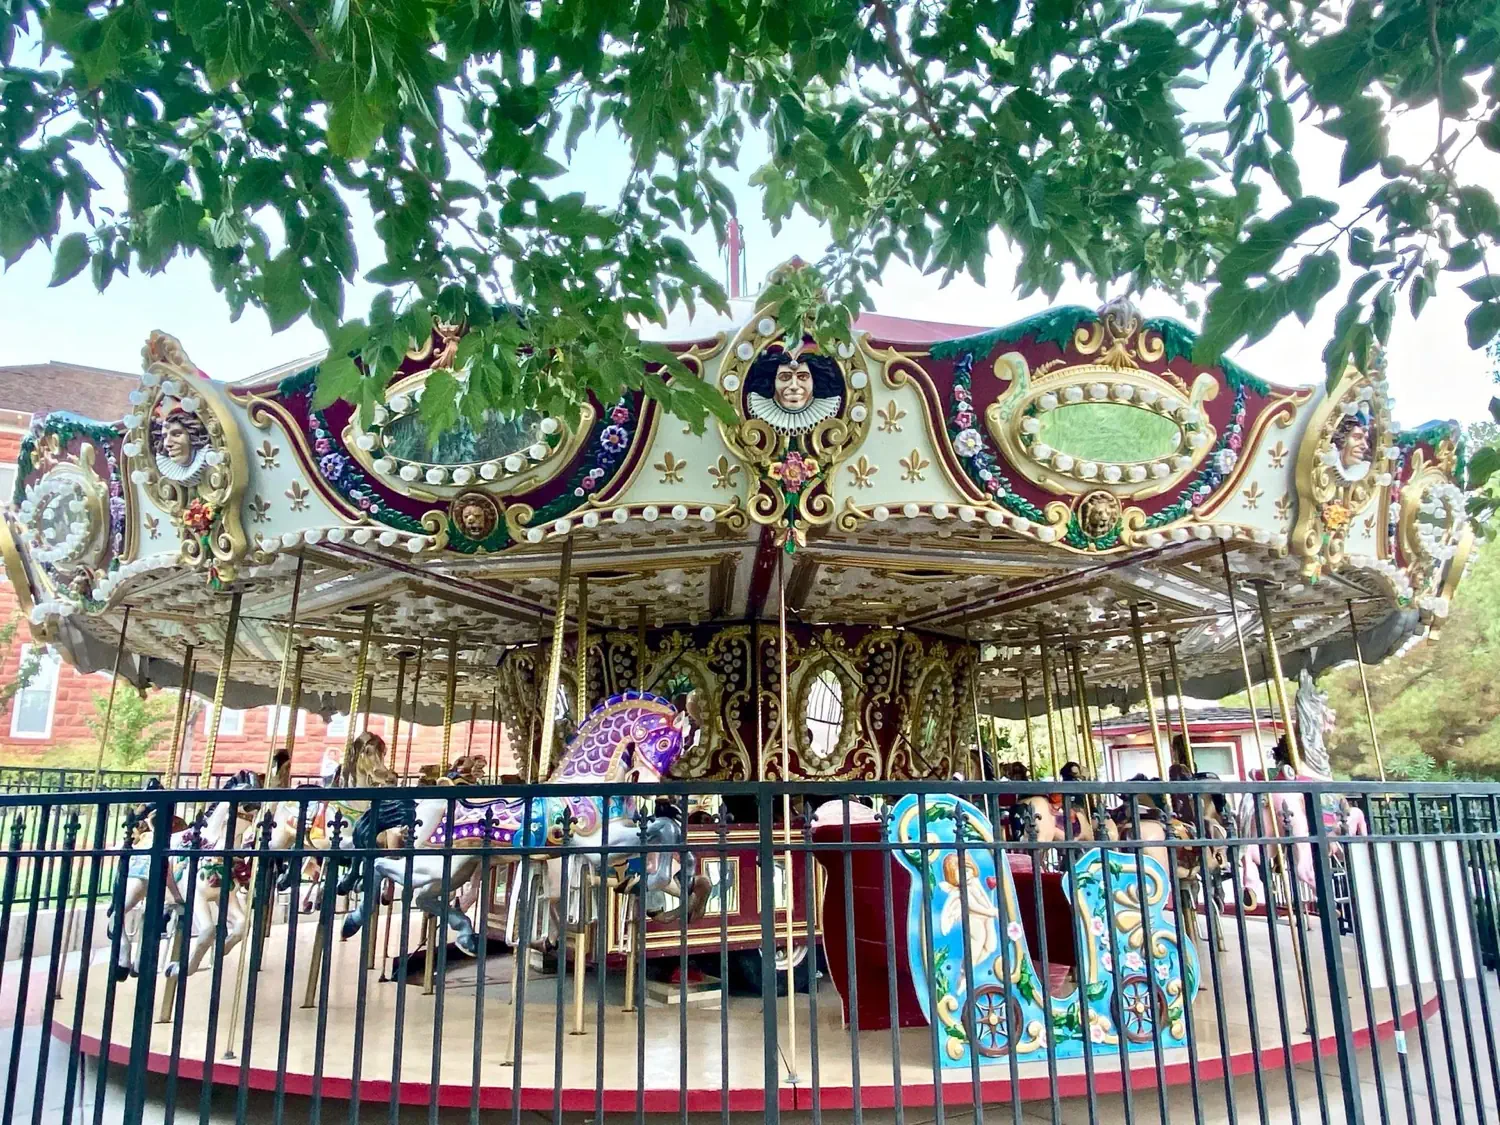 An ornately decorated carousel at the park in St. George, UT